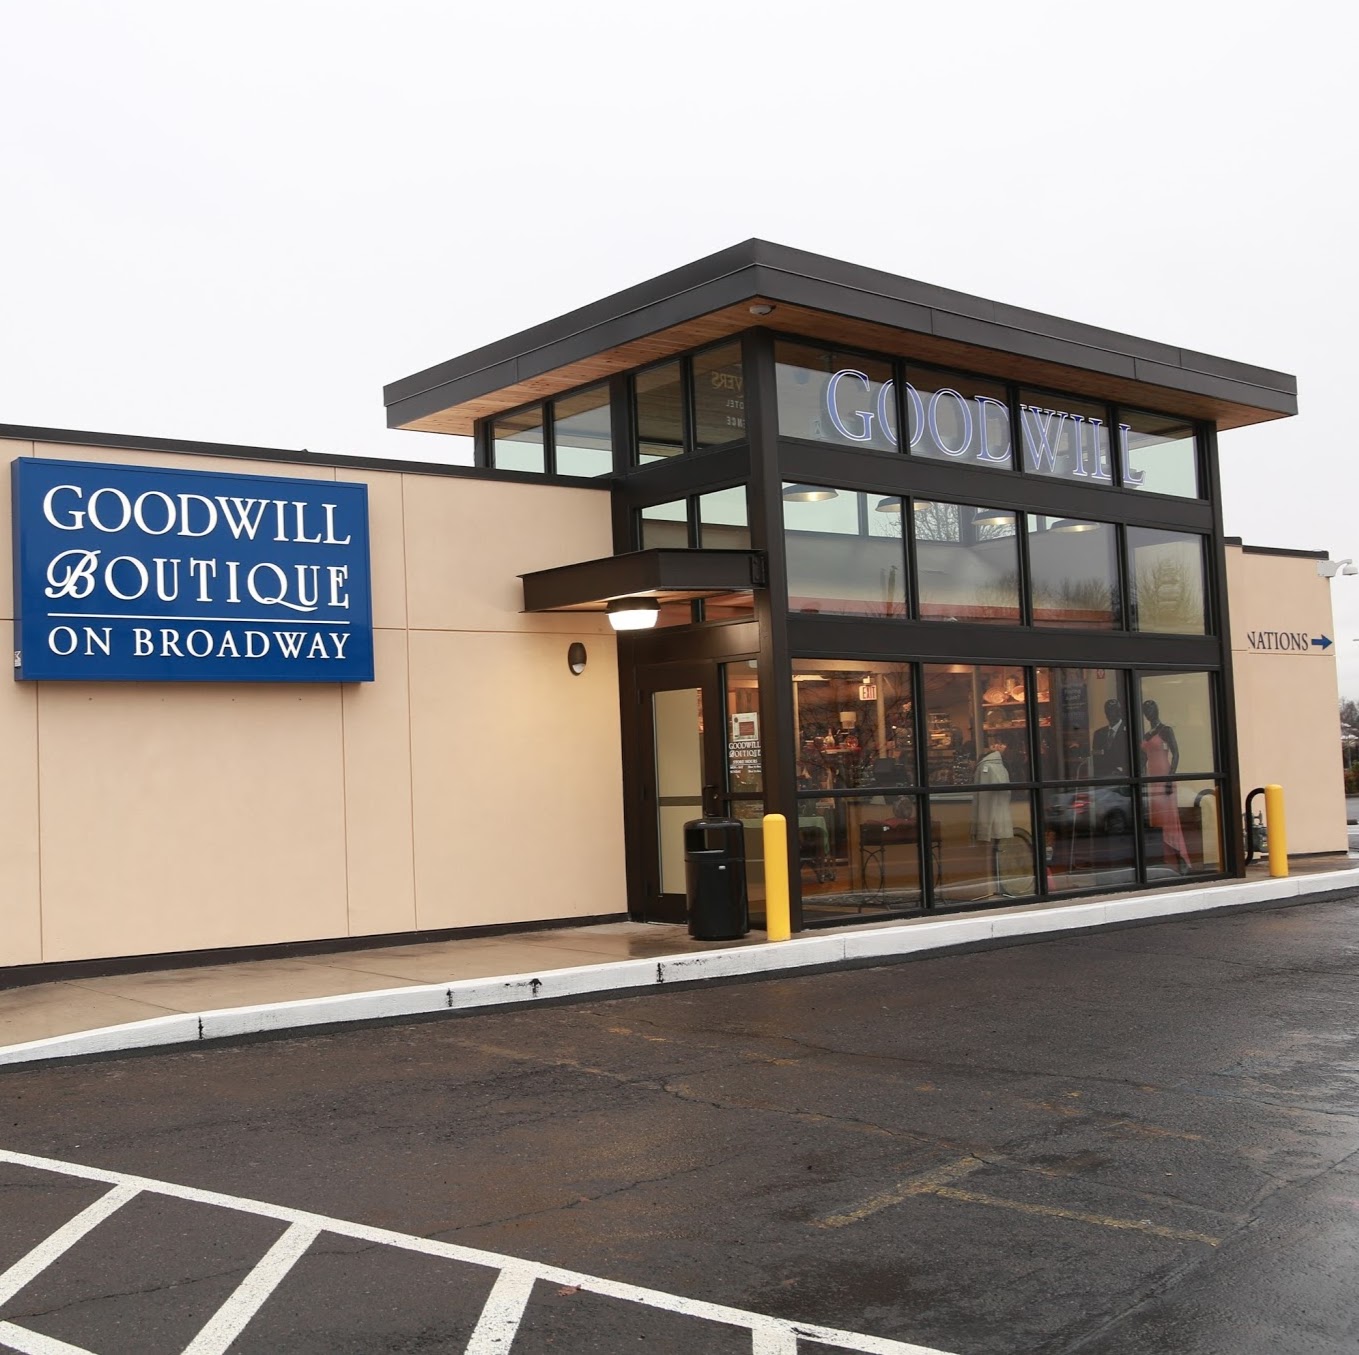 Goodwill Boutique on Broadway Retail Store and Donation Center | 685 E Broadway, Eugene, OR, 97401 | +1 (541) 344-1029